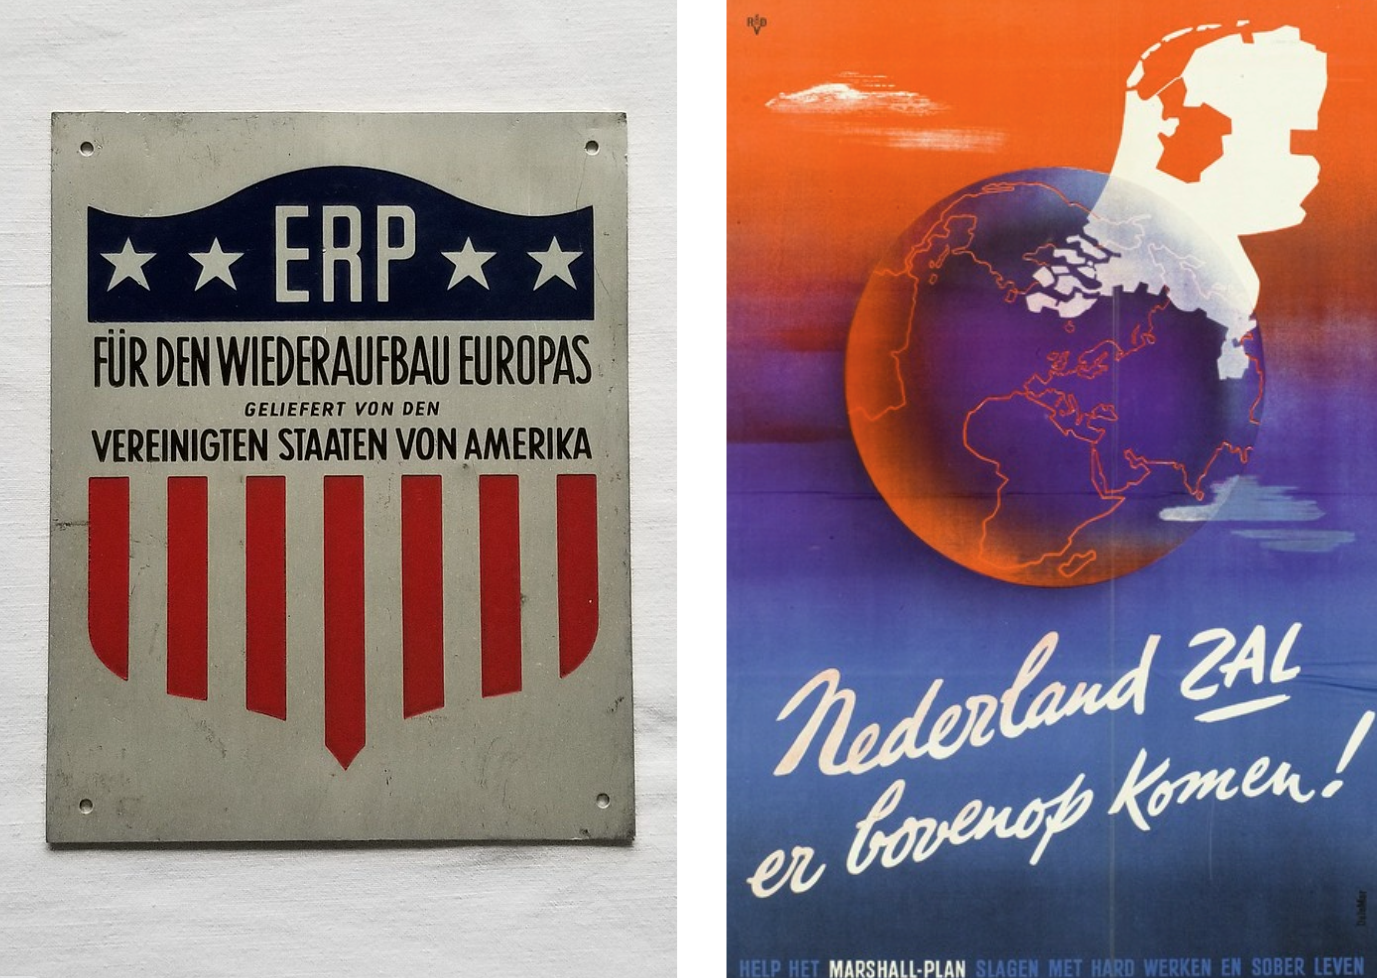 A wide range of advertising materials were distributed throughout Marshall Plan-designated countries to market the program. This placard reads, “Marshall Plan in Germany ERP European Recovery Program” (left). Poster from the Dutch government promoting the Marshall Plan. The poster reads: "The Netherlands WILL emerge! Help to make the Marshall plan succeed by working hard and living sober." (right)